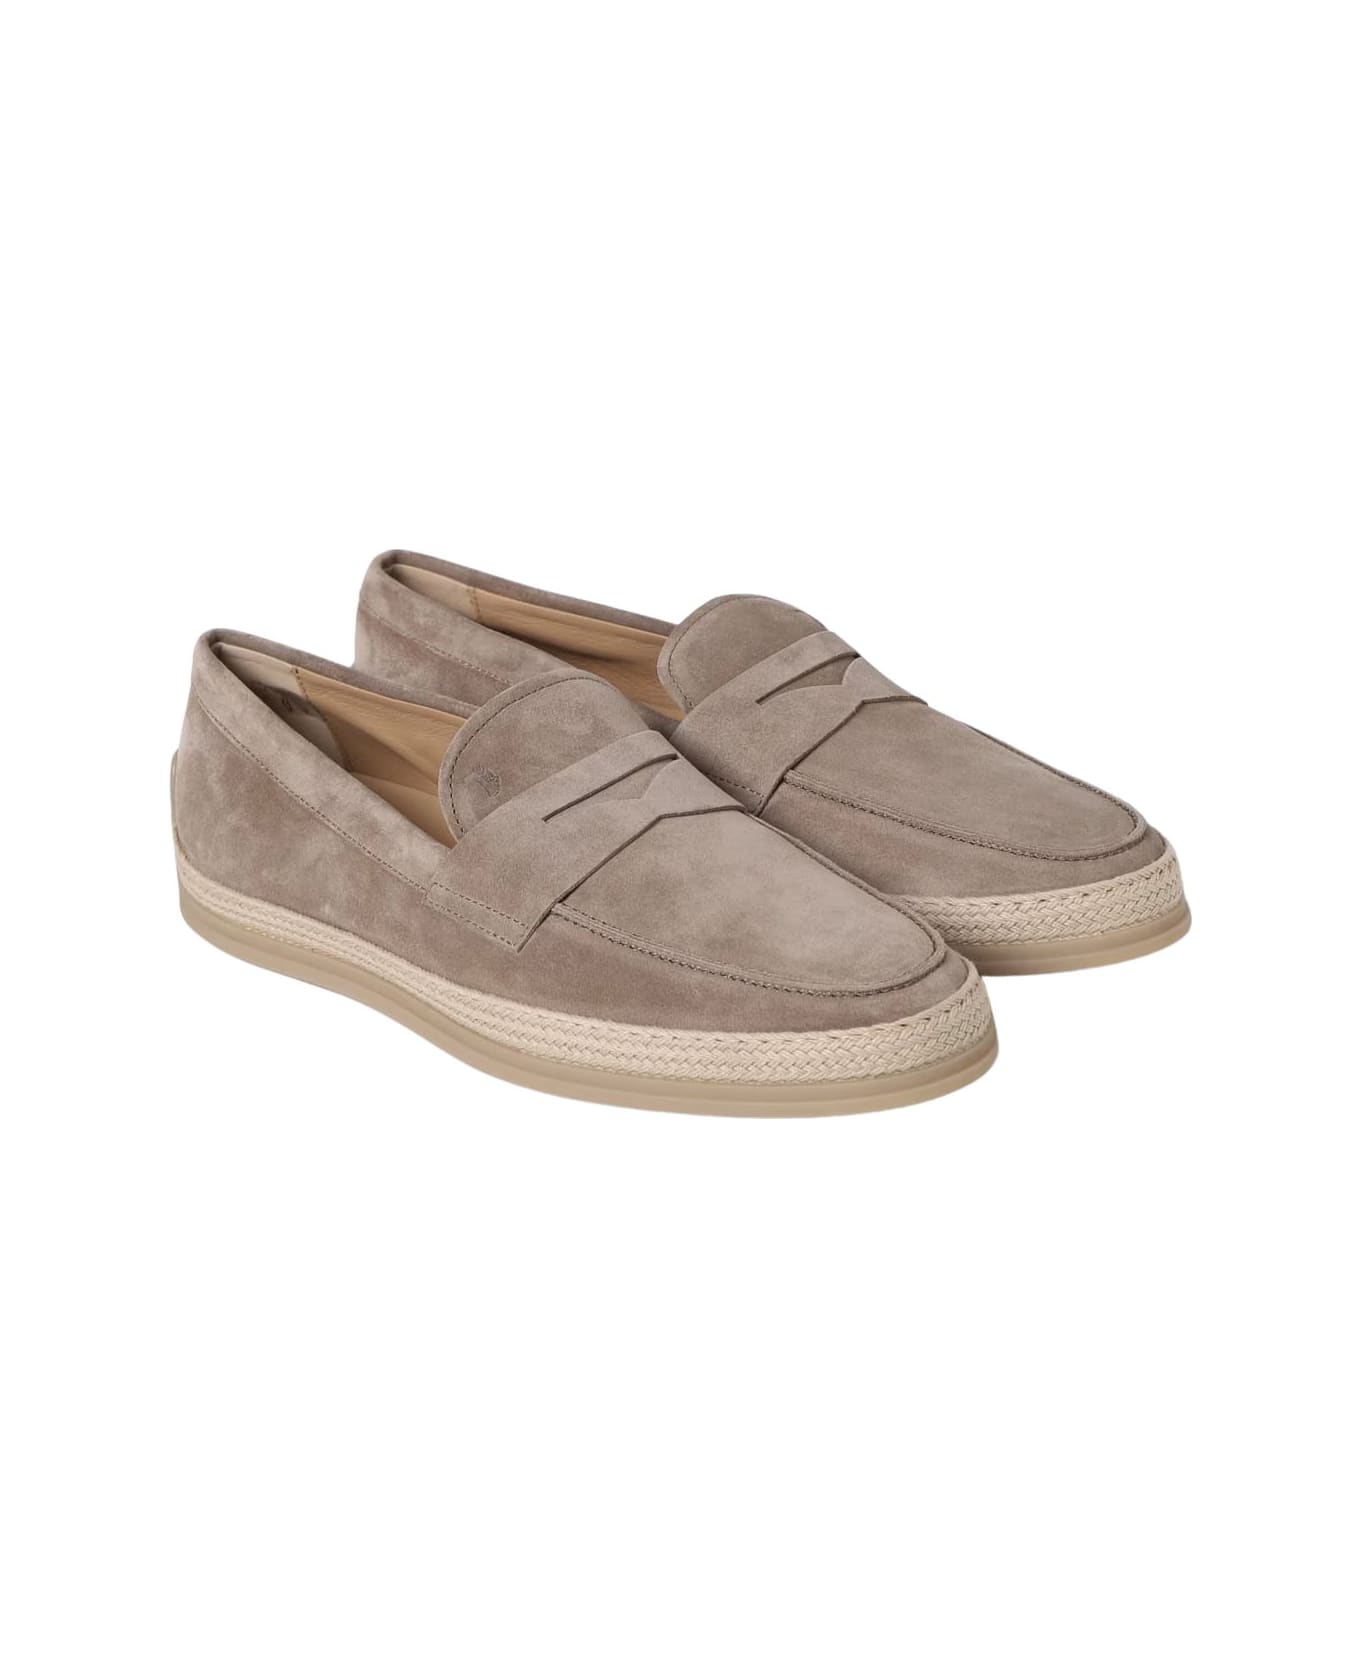 Tod's Suede Moccasins - Beige ローファー＆デッキシューズ